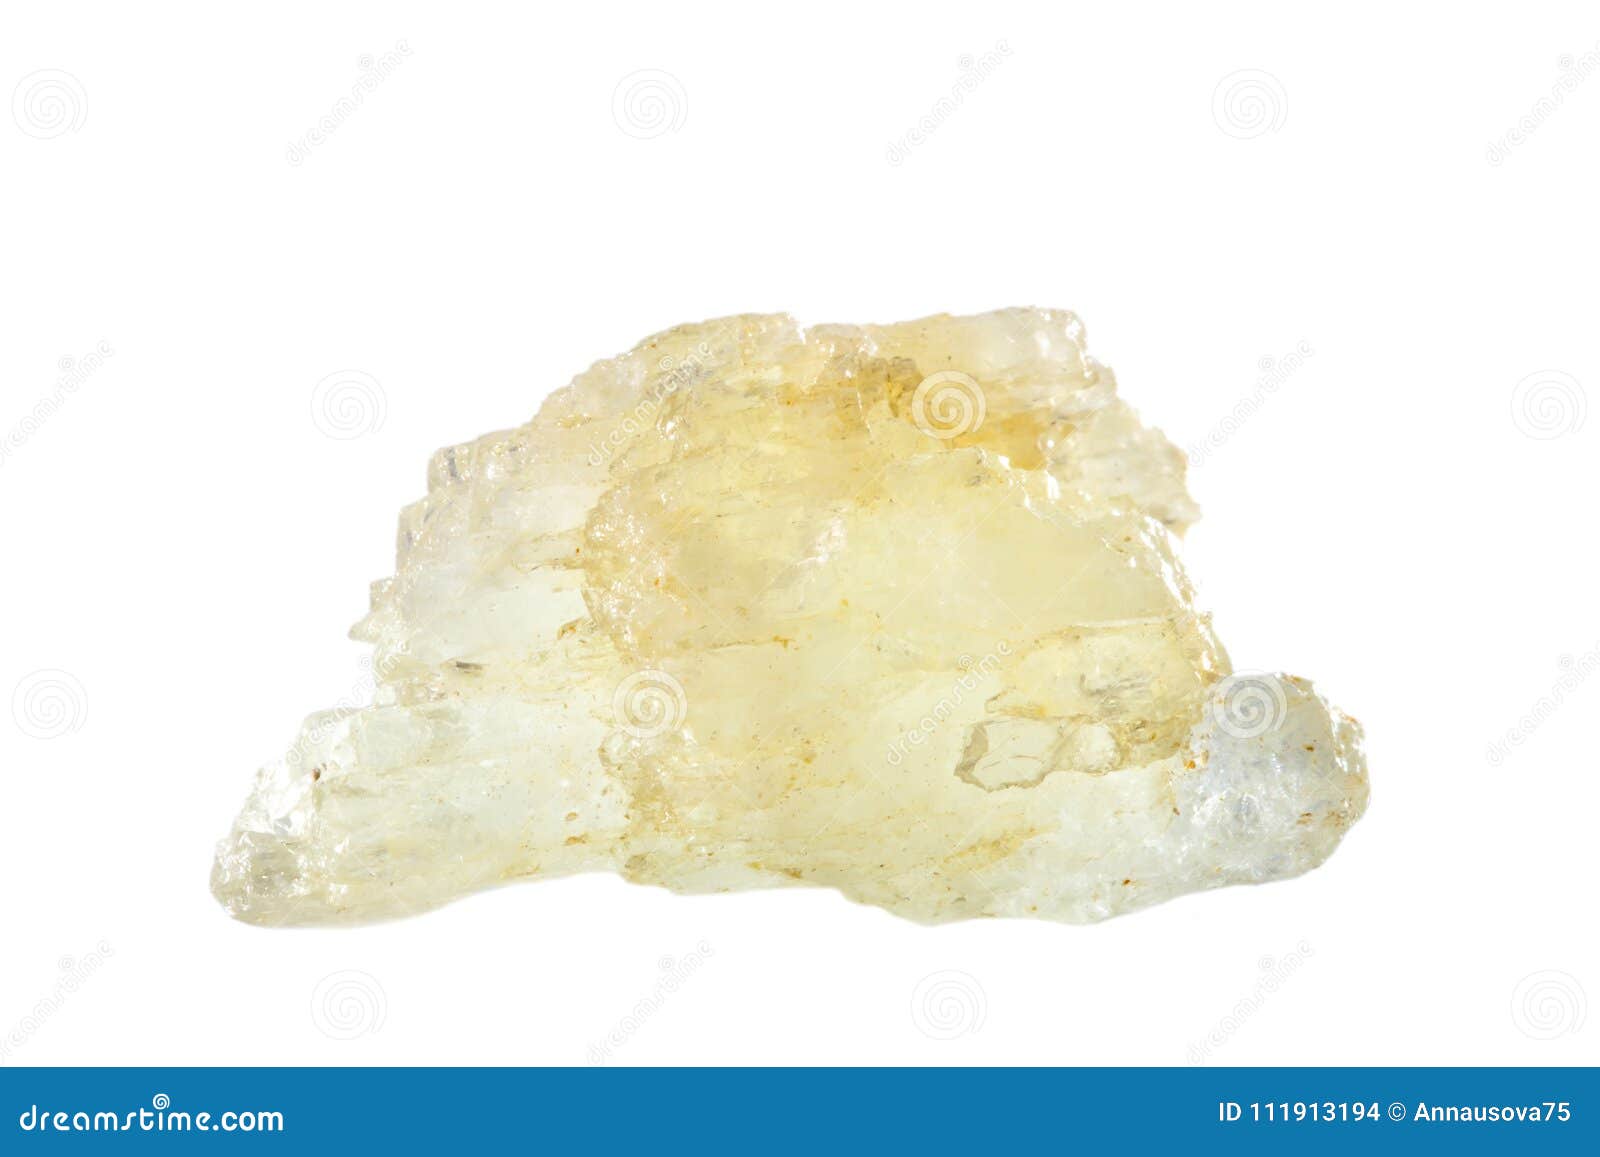 macro shooting of natural gemstone. the raw mineral beryl, brazil.  object on a white background.